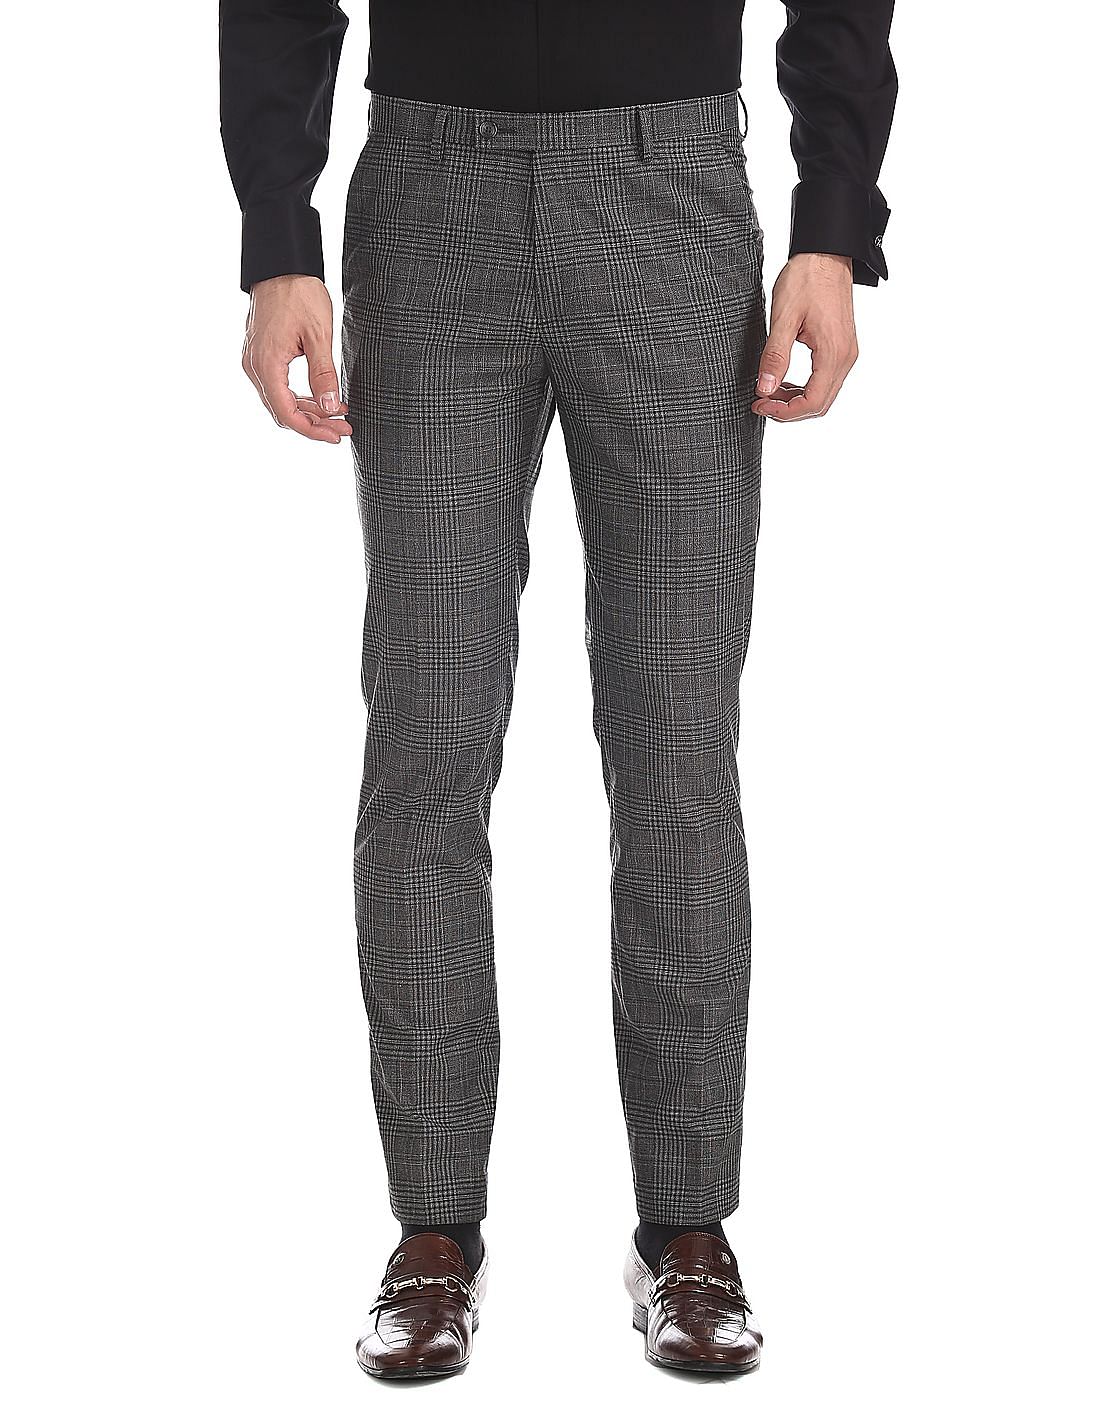 Buy Arrow Newyork Super Slim Fit Patterned Check Trousers - NNNOW.com